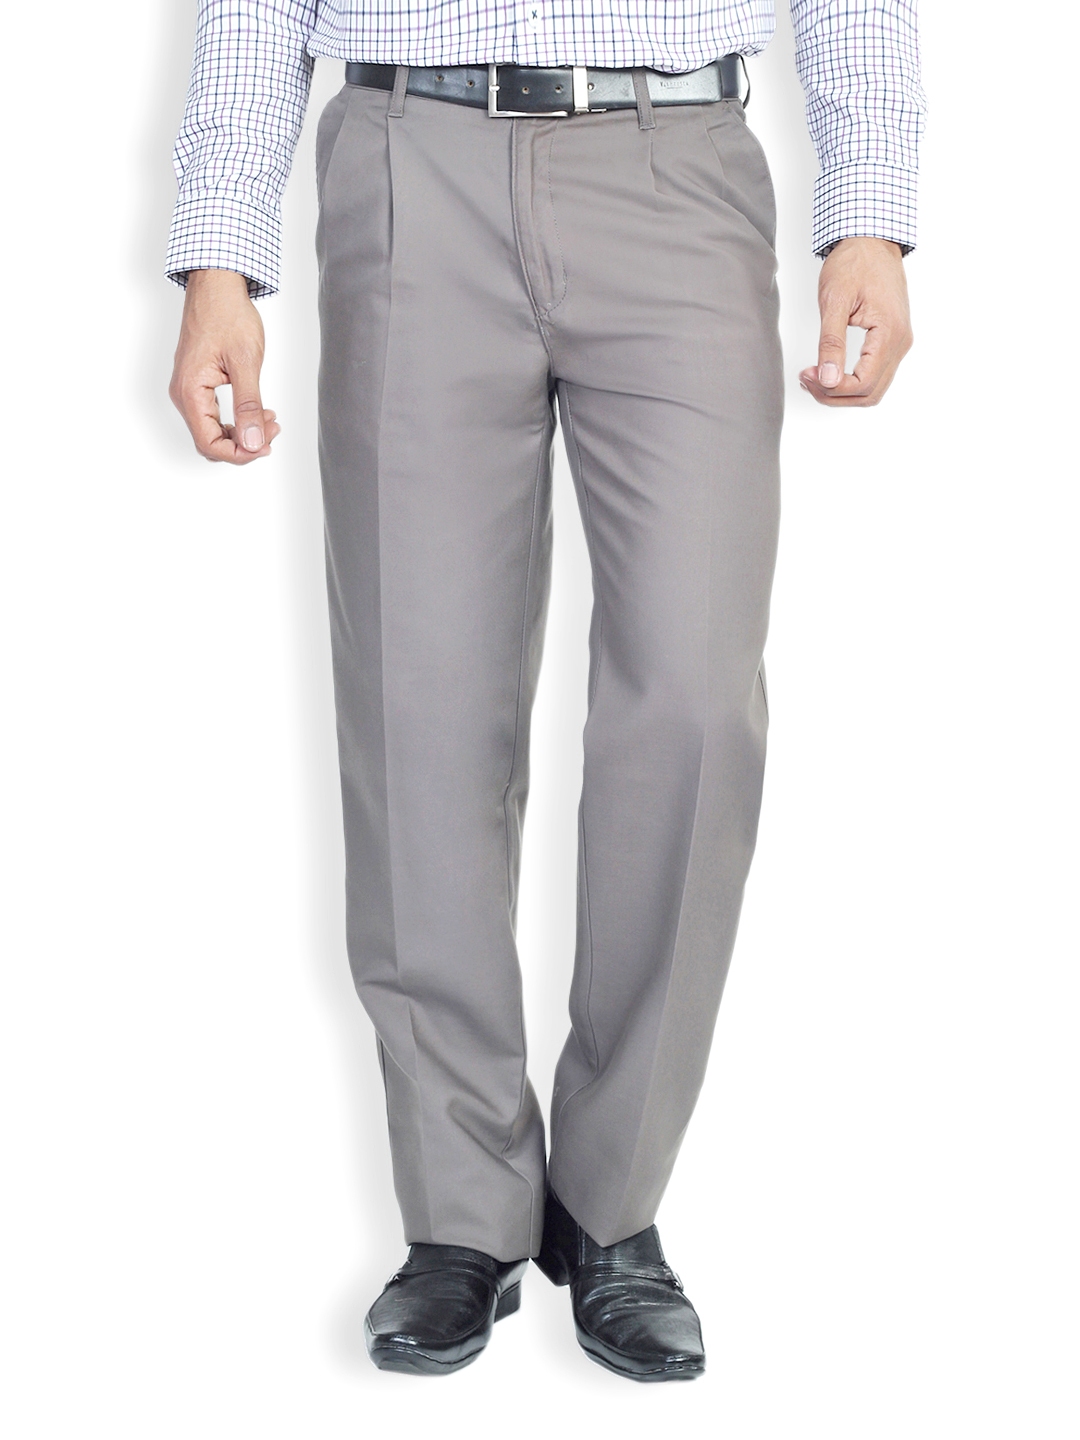 Checked Trousers  Buy Checked Trousers online in India